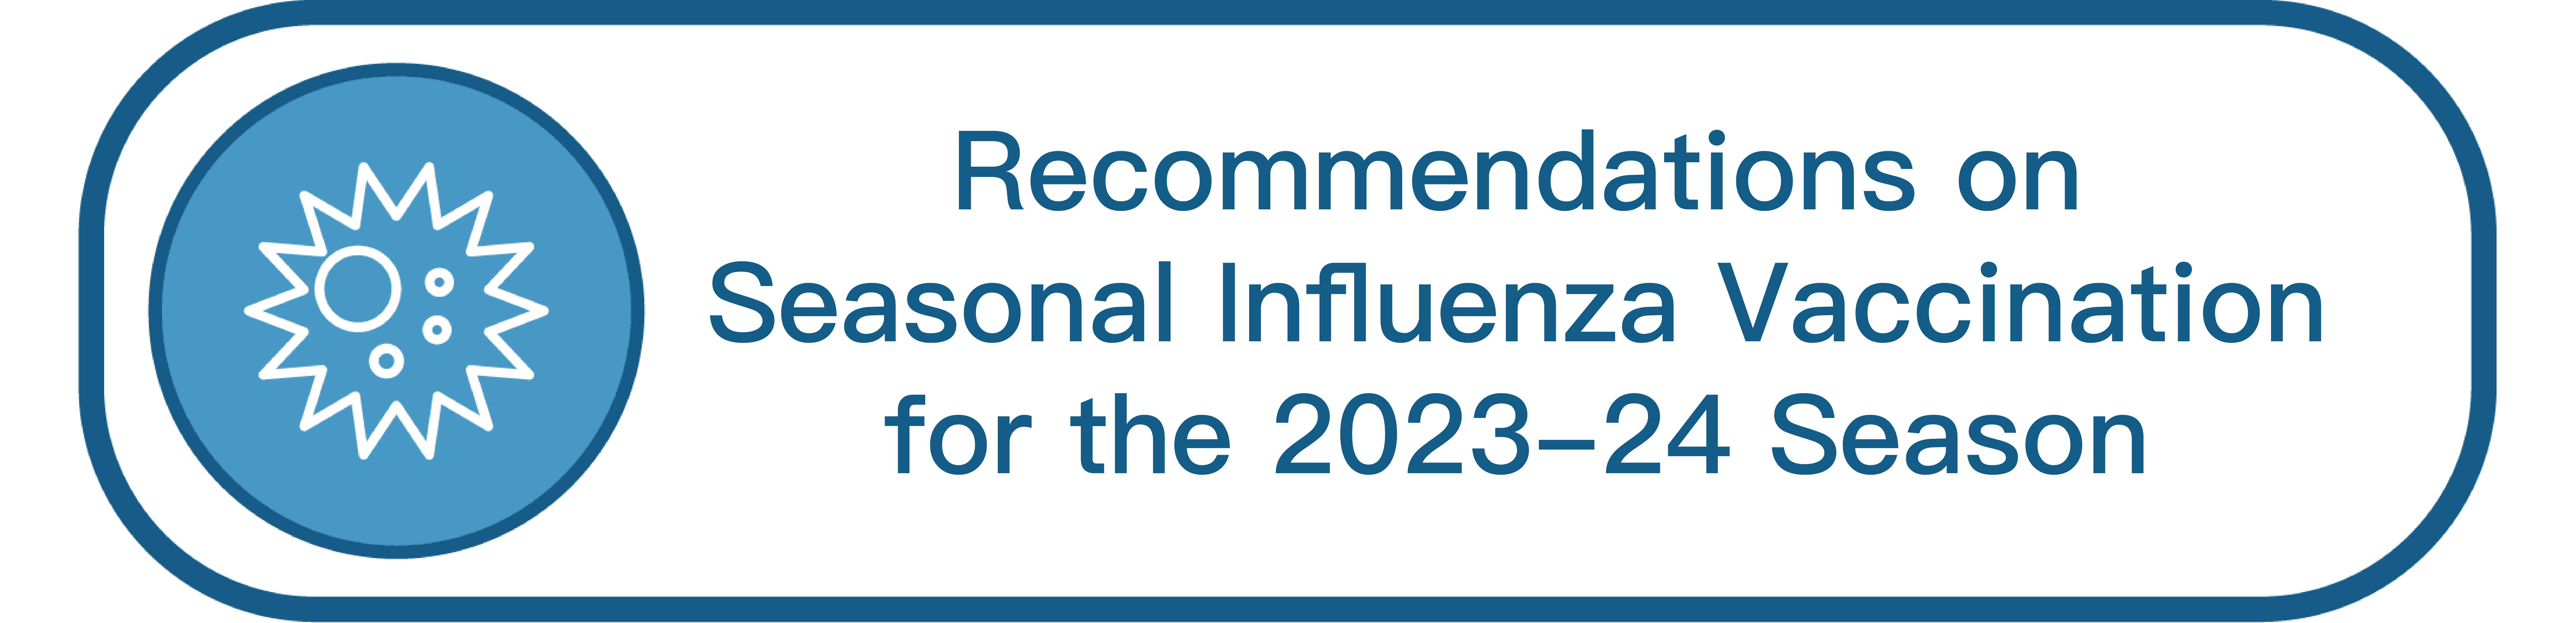 Recommendations on Seasonal Influenza Vaccination for the 2023-24 Season